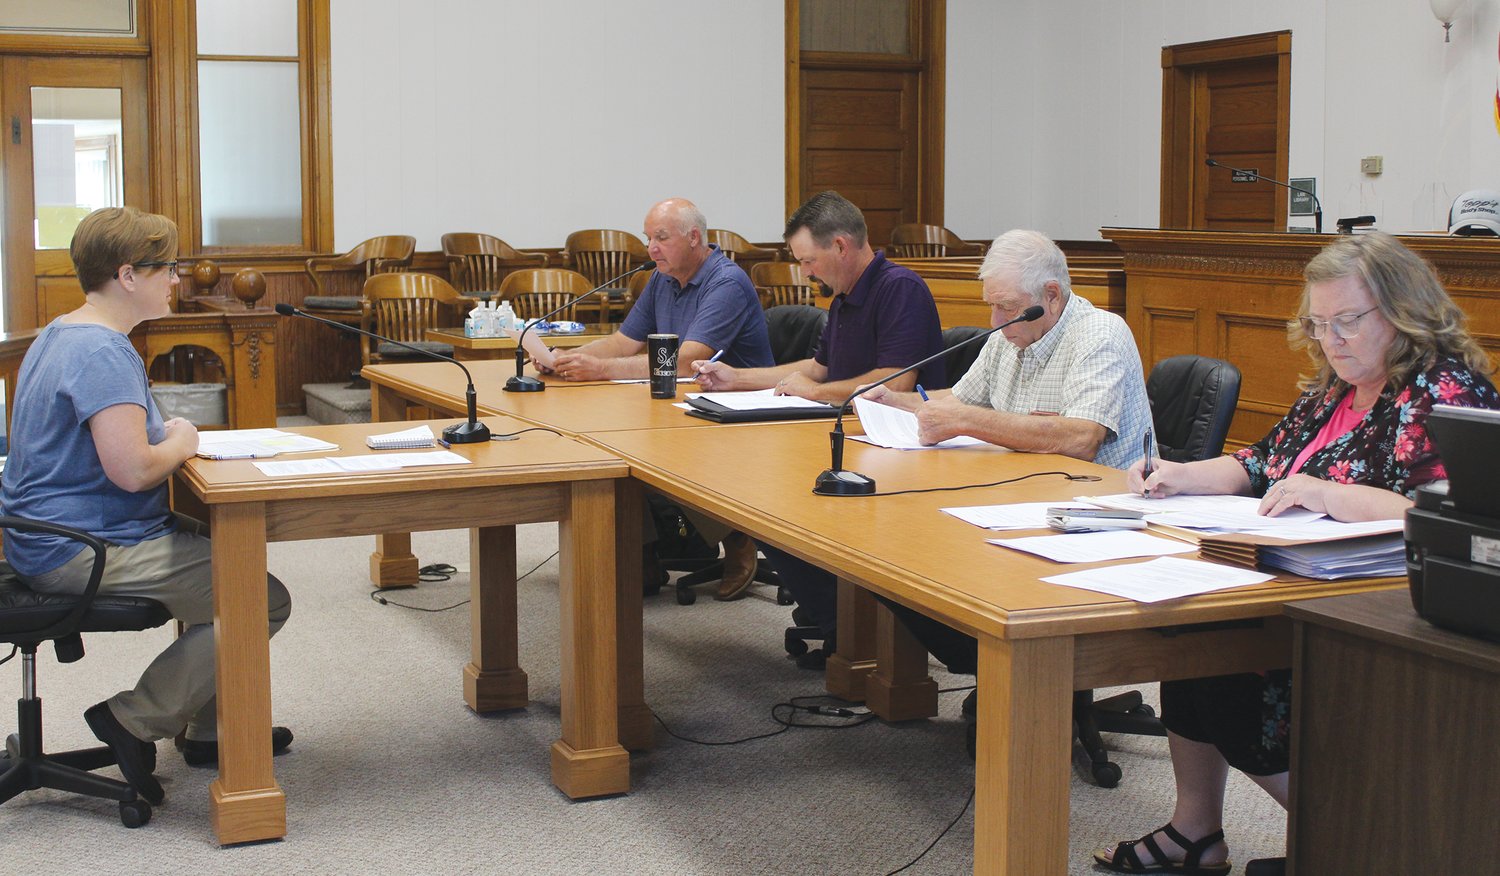 Wayne County Assessor Dawn Duffy shared information on several topics with Wayne County Commissioners on Tuesday.